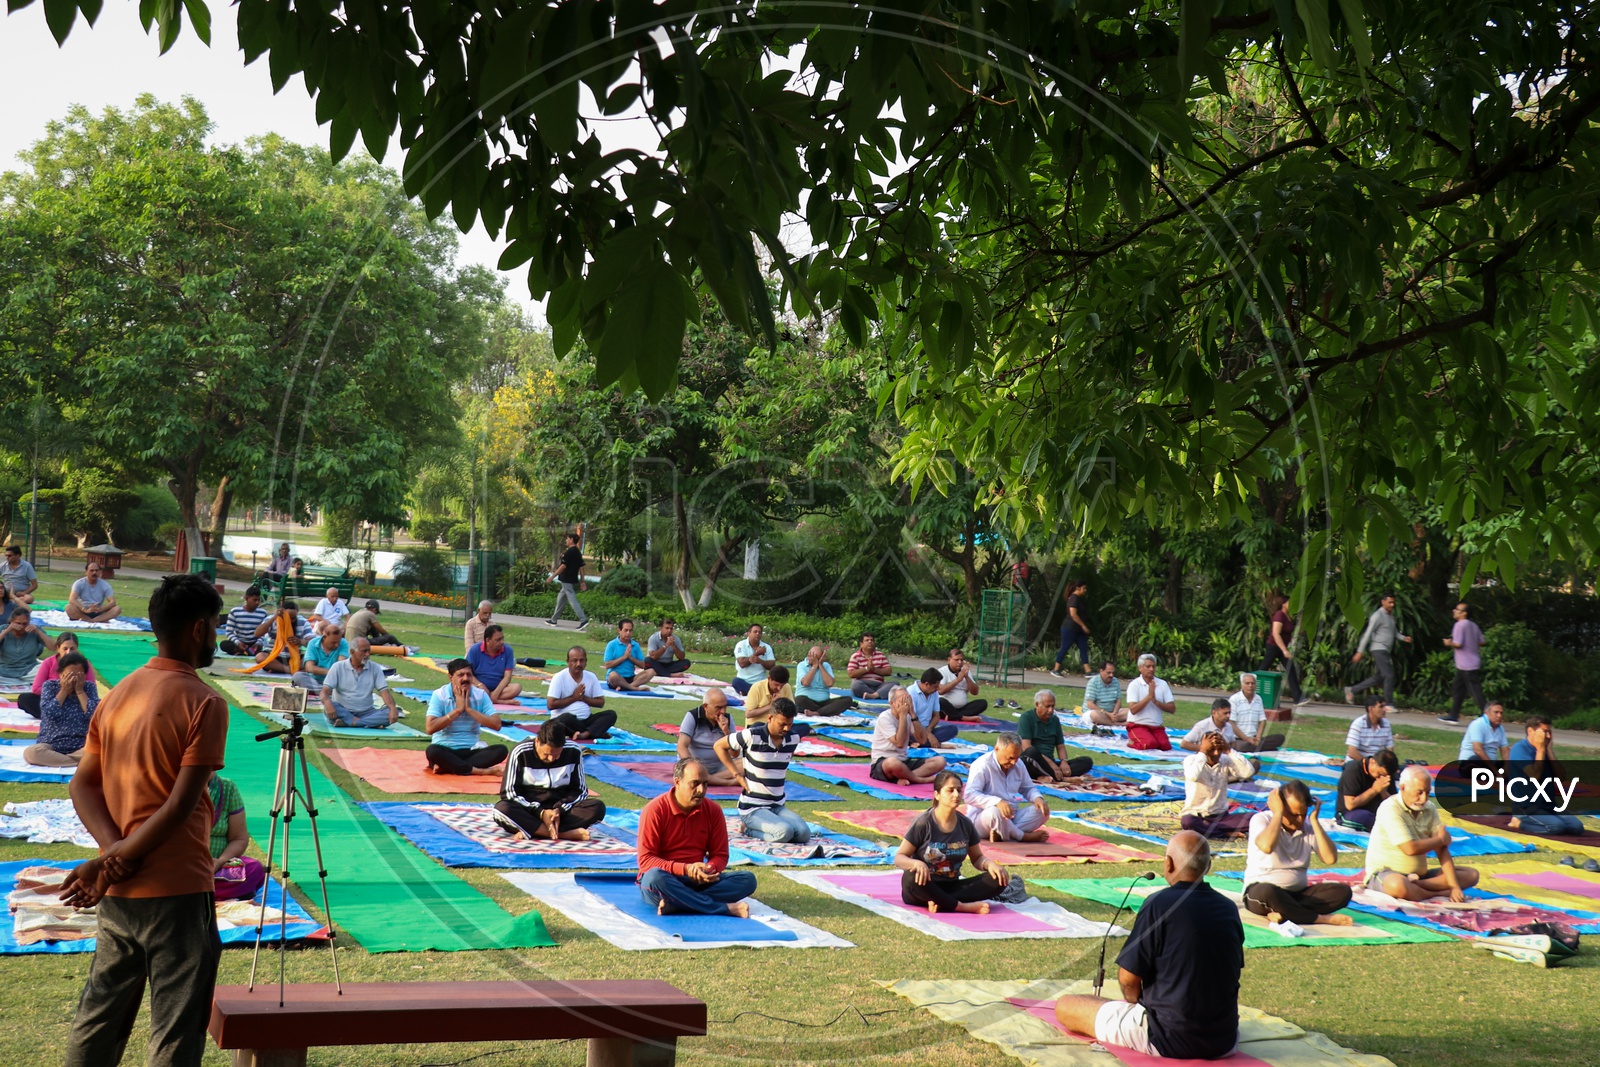 People doing yoga and meditation in a park